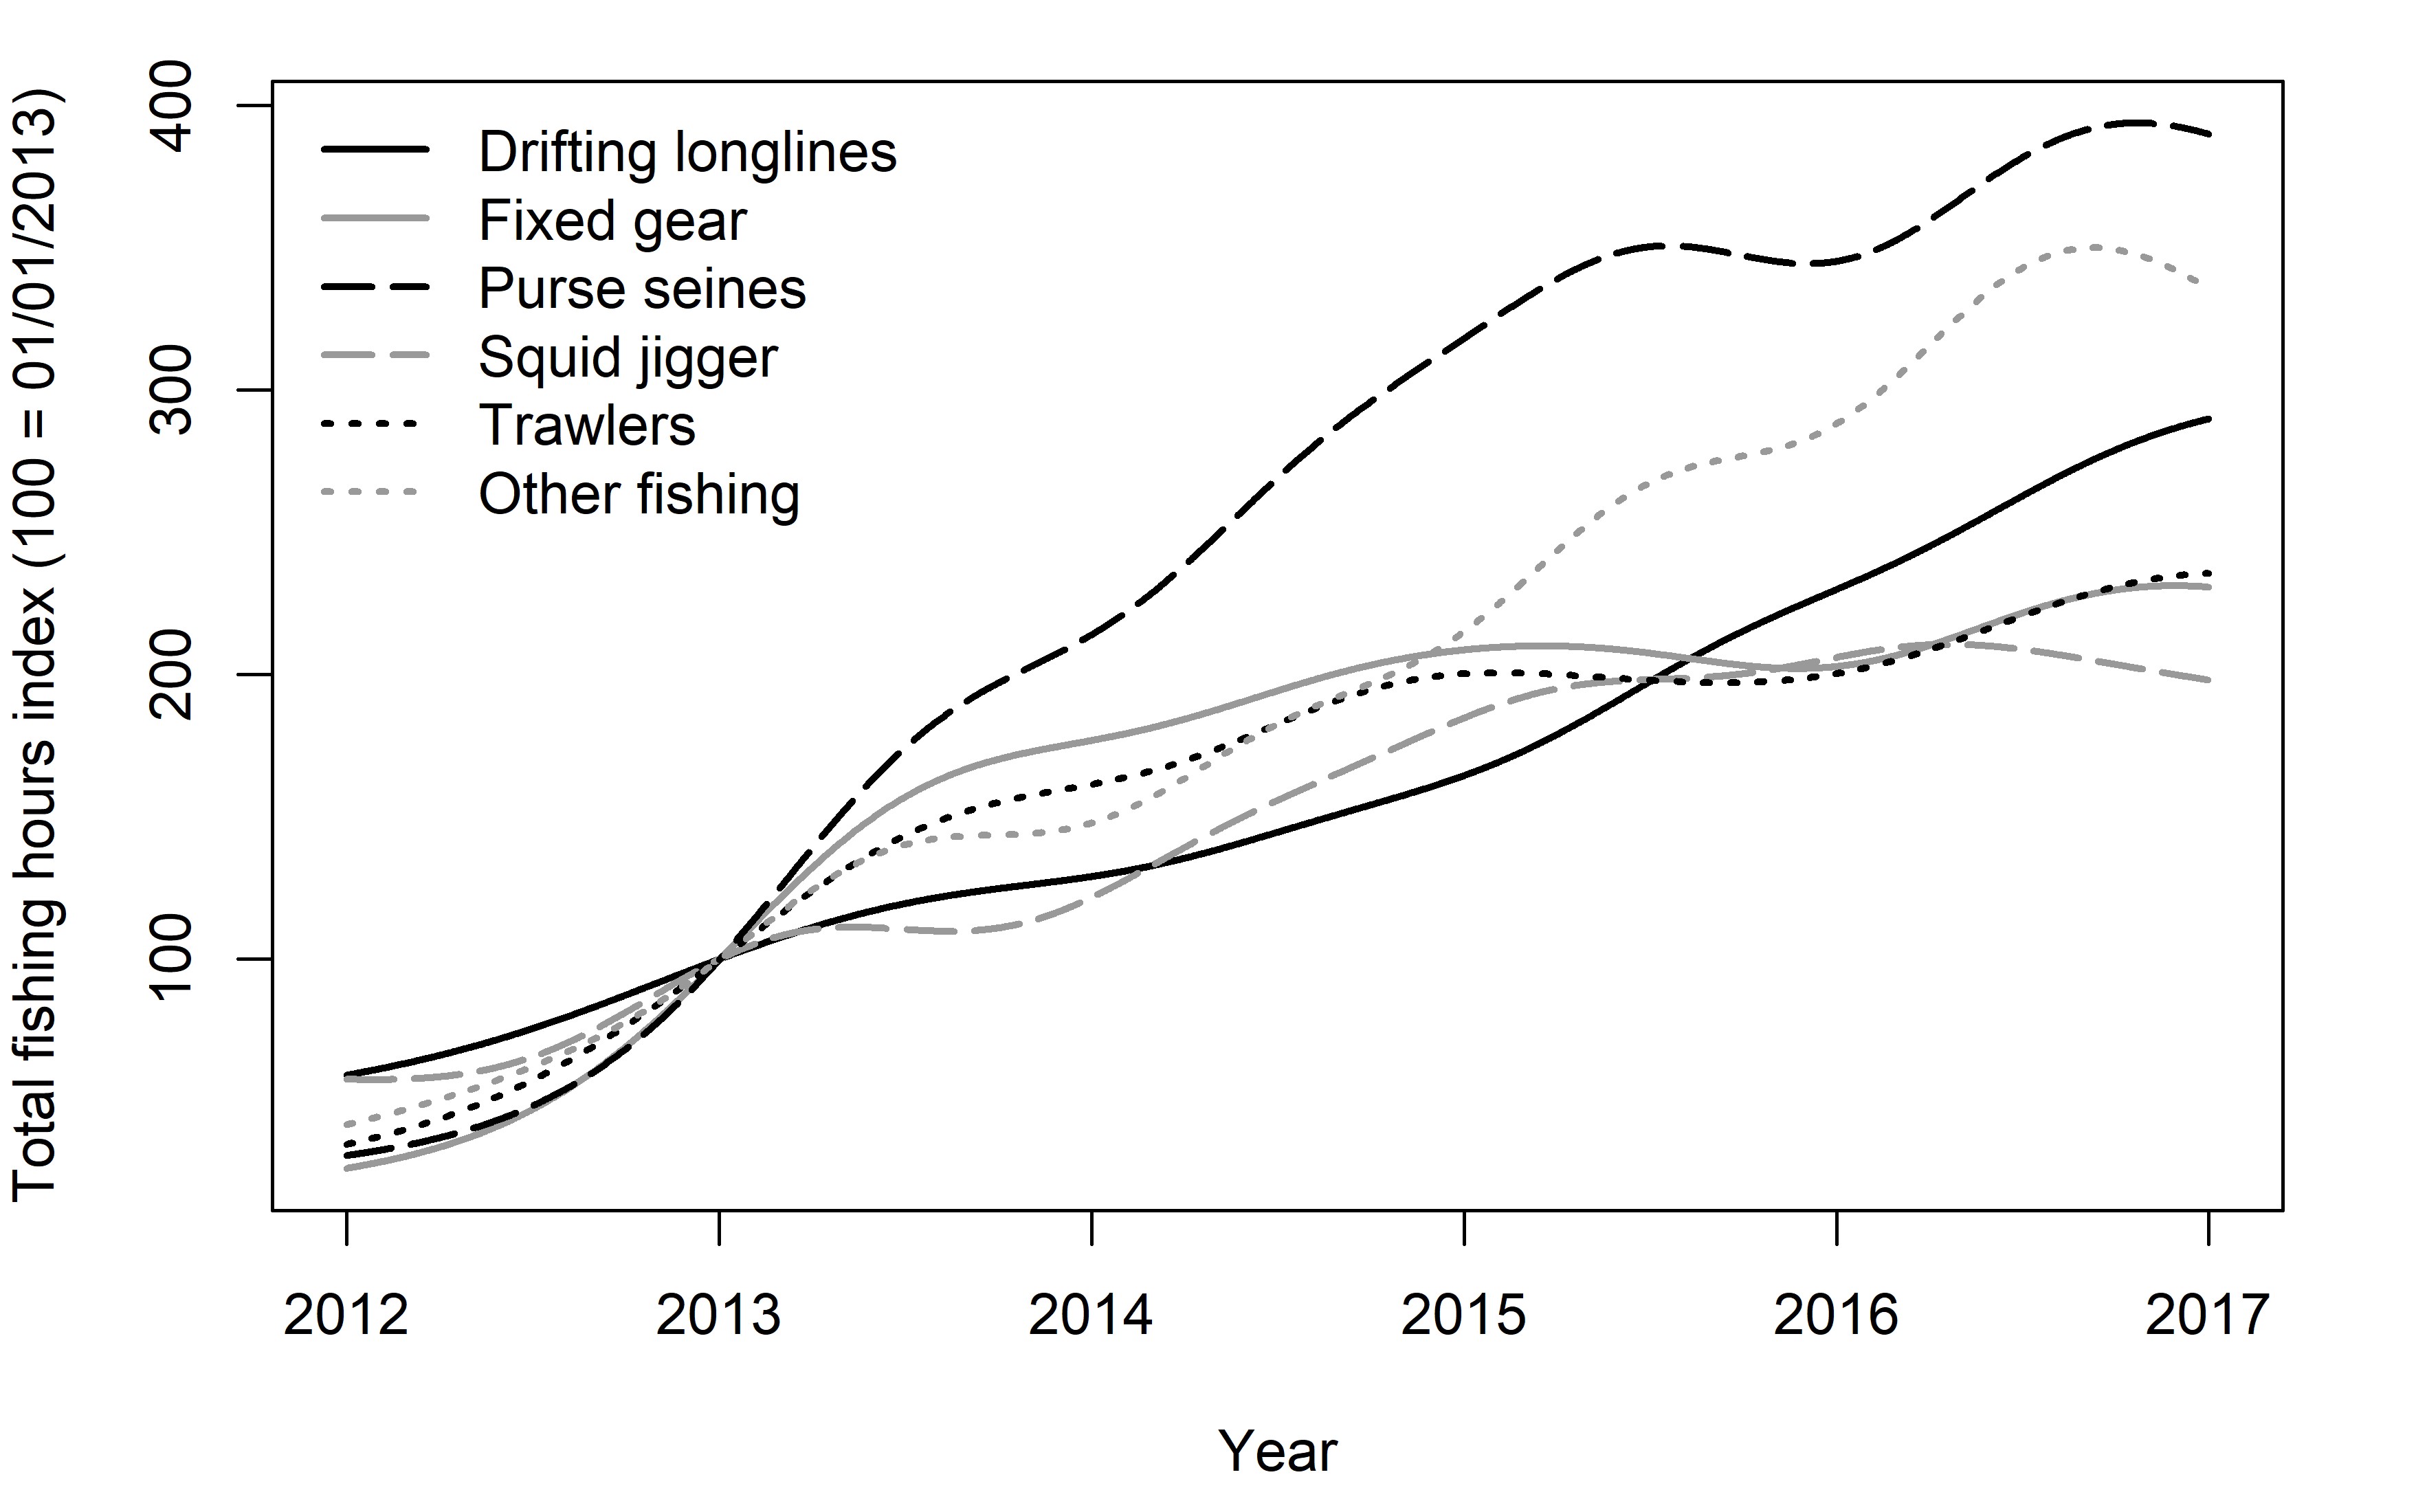 Fishing effort and total catches<br>Data source: Global Fishing Watch